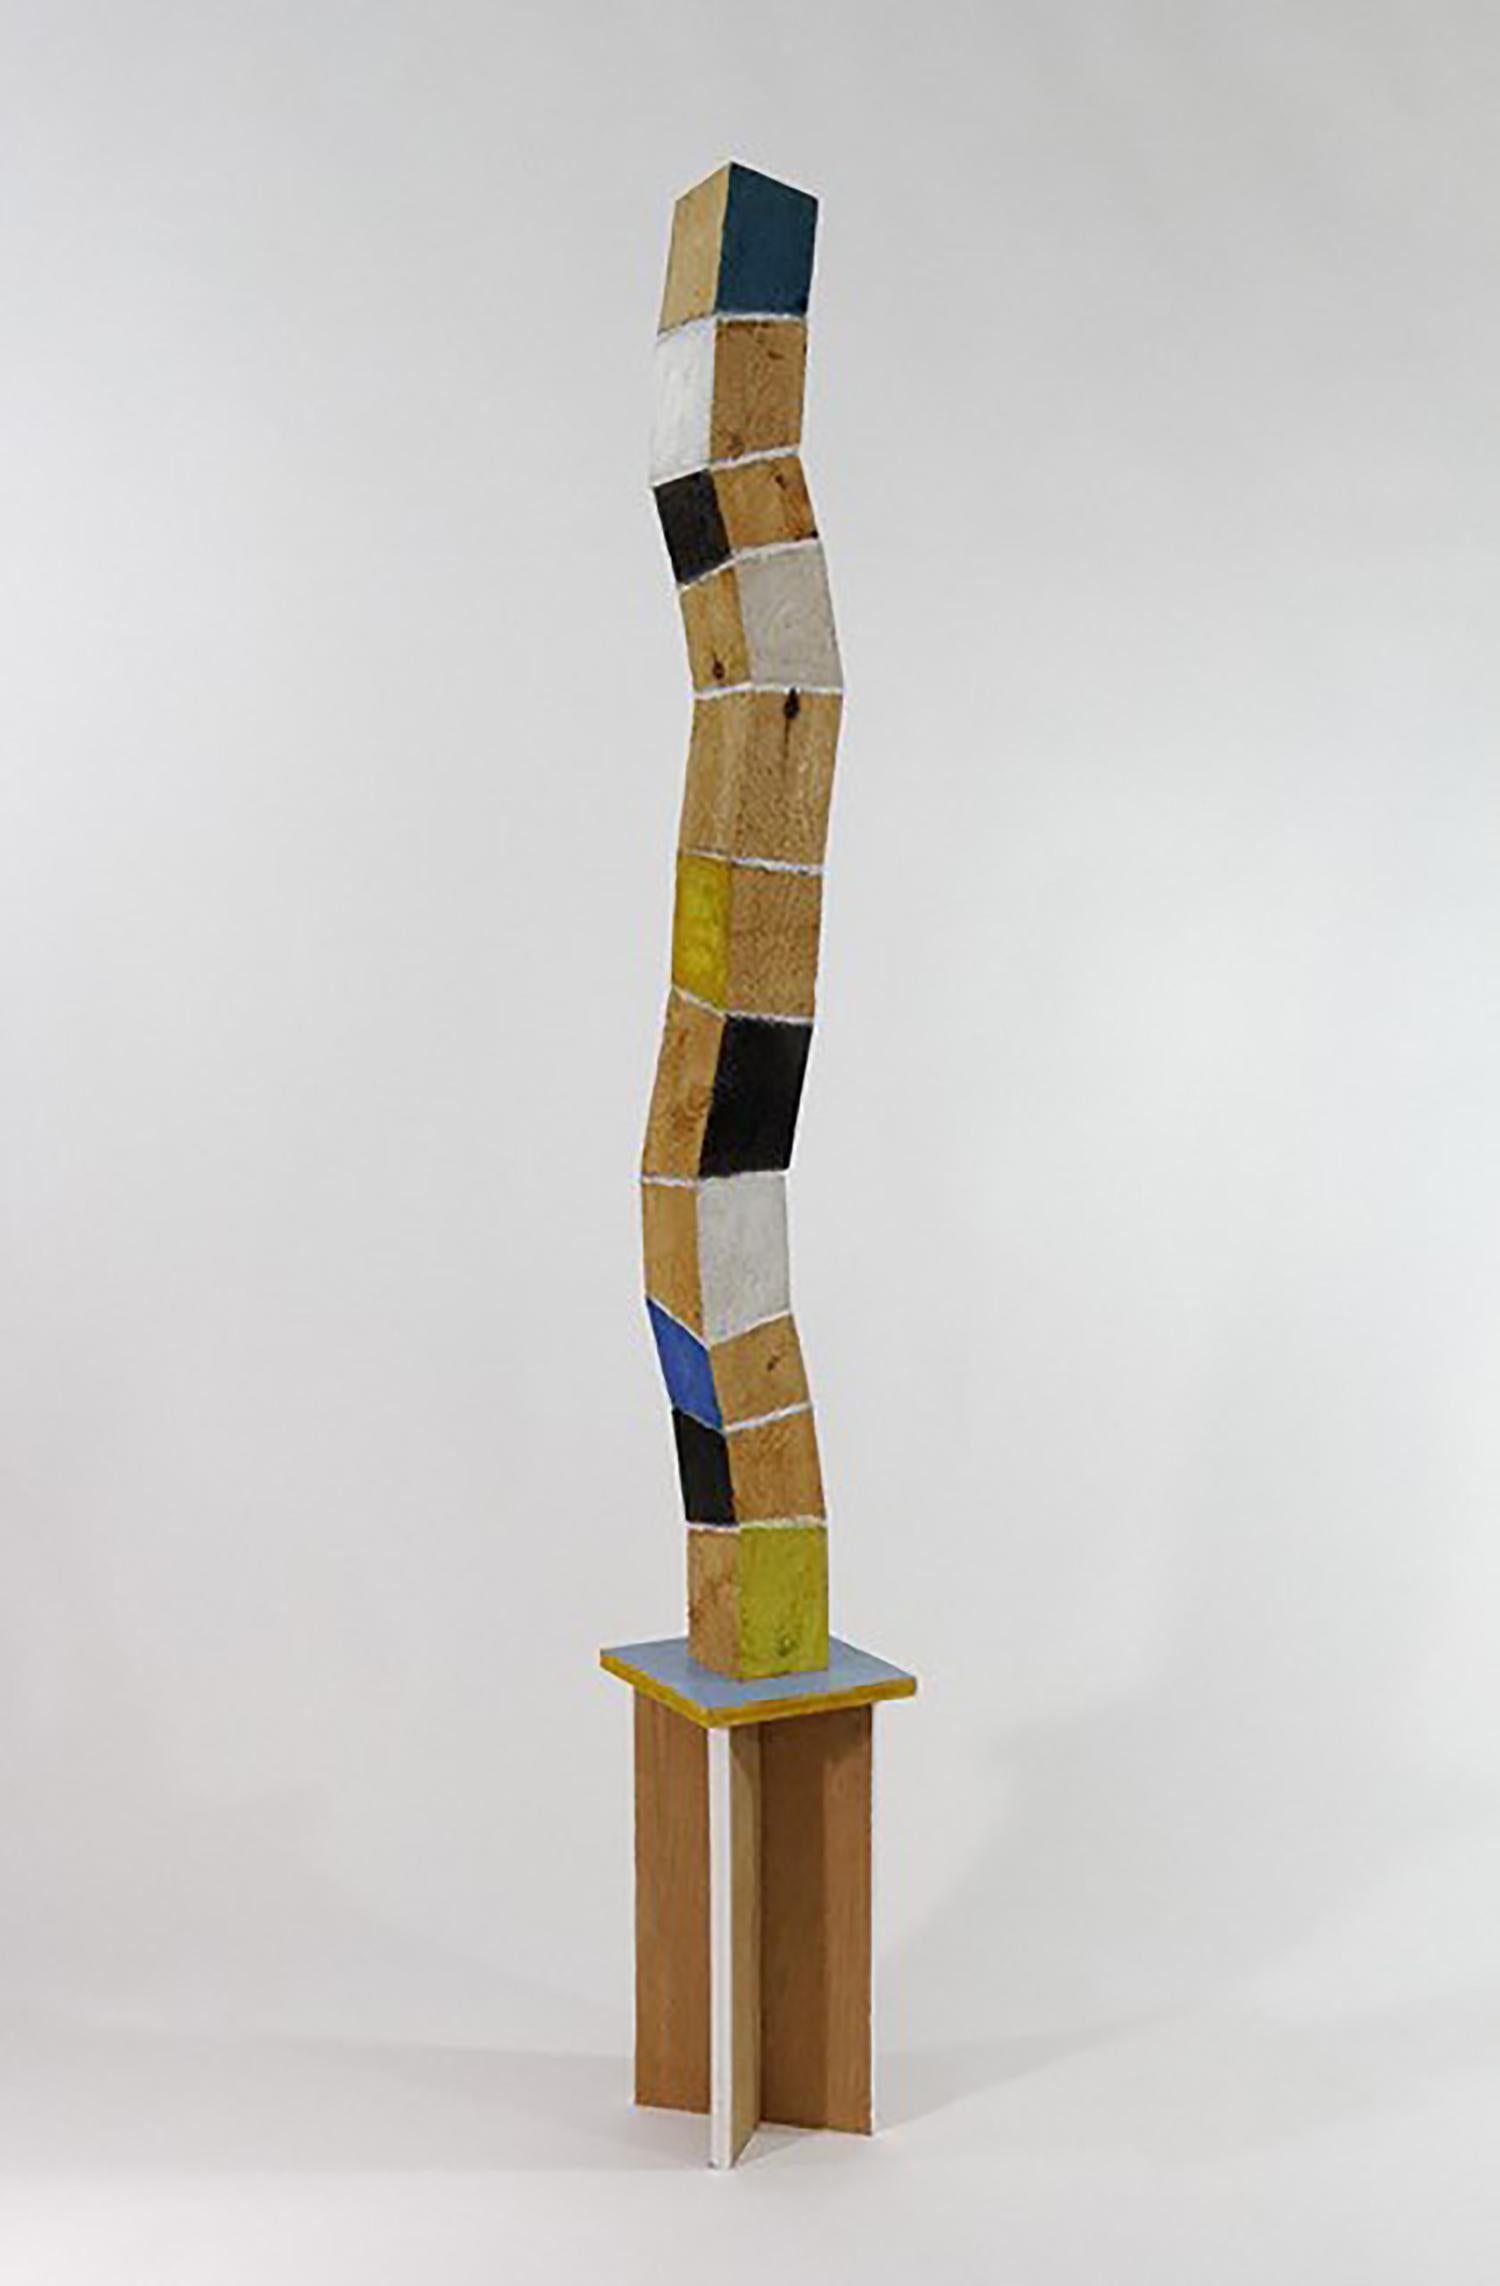 Peter Hoffman Abstract Sculpture - New Growth (Vertical Wooden Curvy Multicolored Standing Tower Sculpture) 